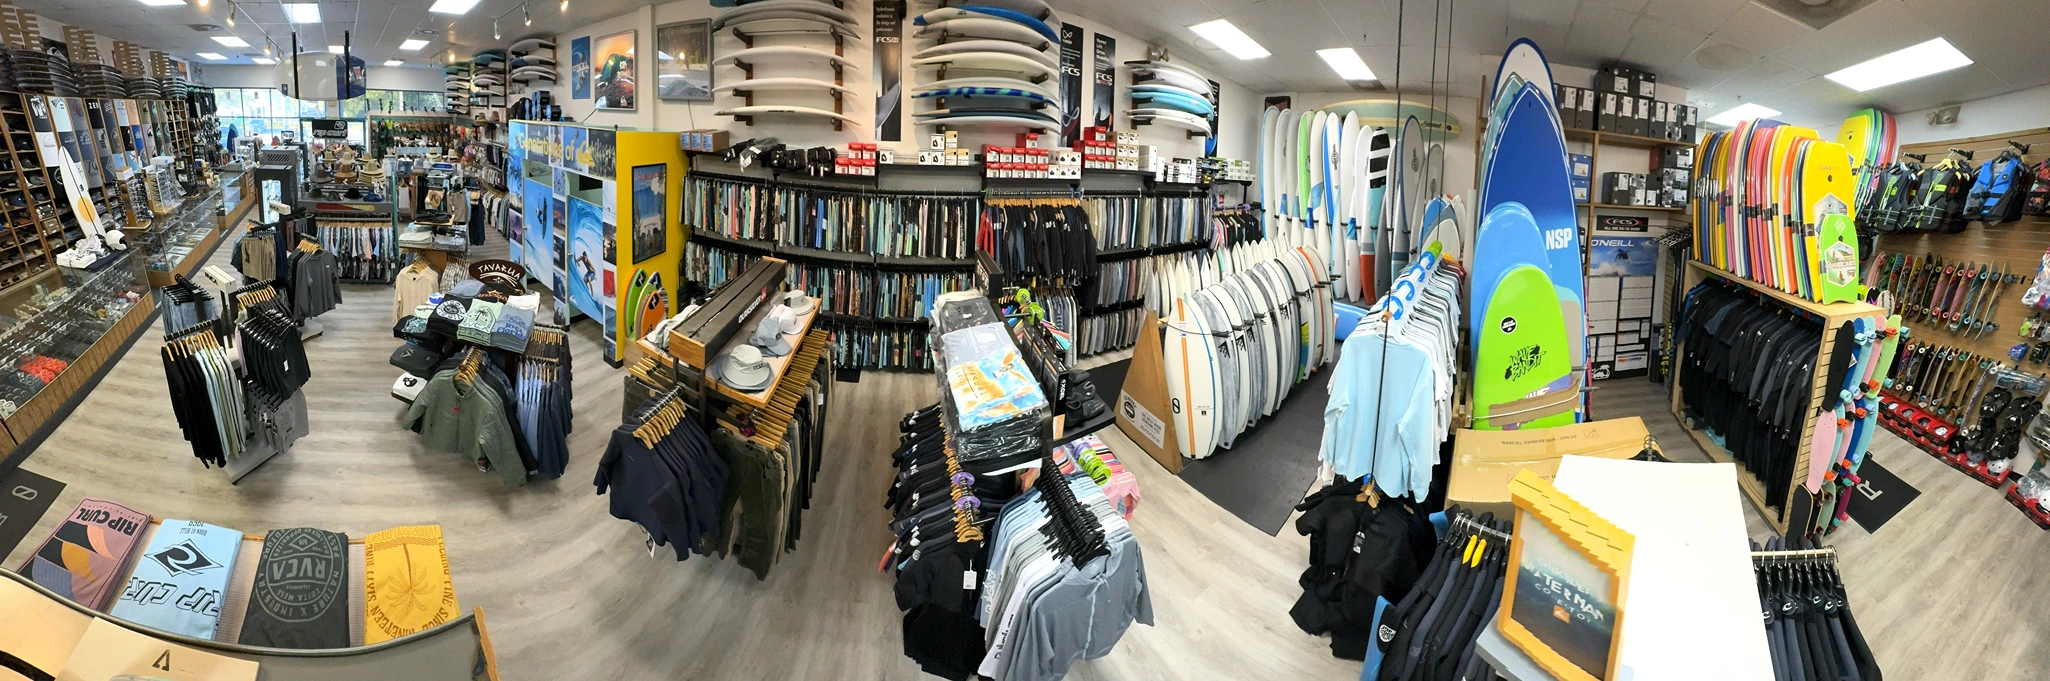 wide view of a surf store